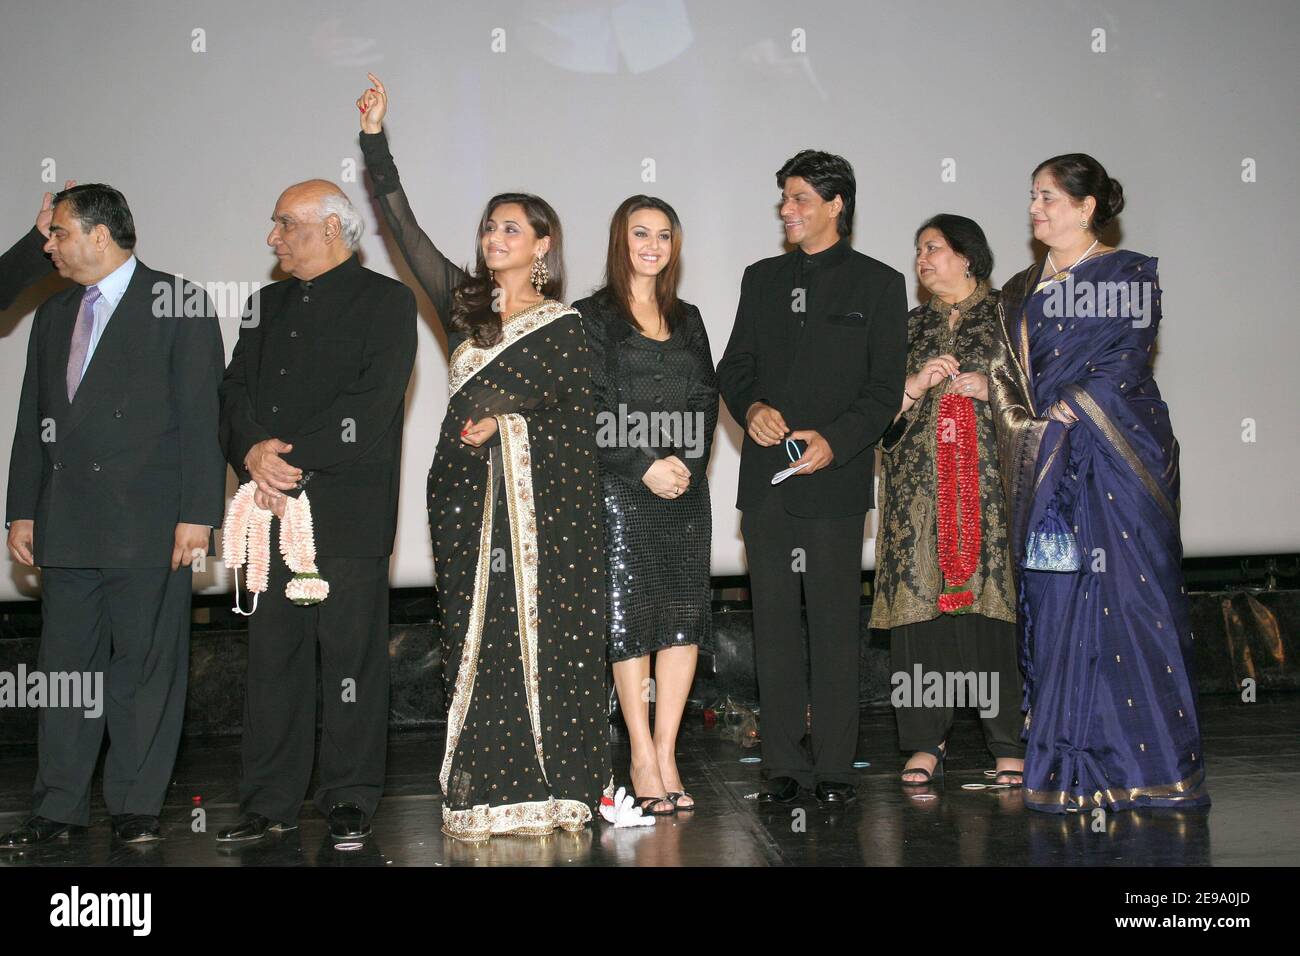 Indian director Yash Chopra, Indian actress Preity Zinta, Bollywood star Shah Rukh Khan and Rani Mukerji attend the premiere of their movie Veer-Zaara held at the Rex Movie Theatre in Paris, France on April 26, 2006 as part of the Bollywood Week, in Paris. Photo by Benoit Pinguet/ABACAPRESS.COM Stock Photo